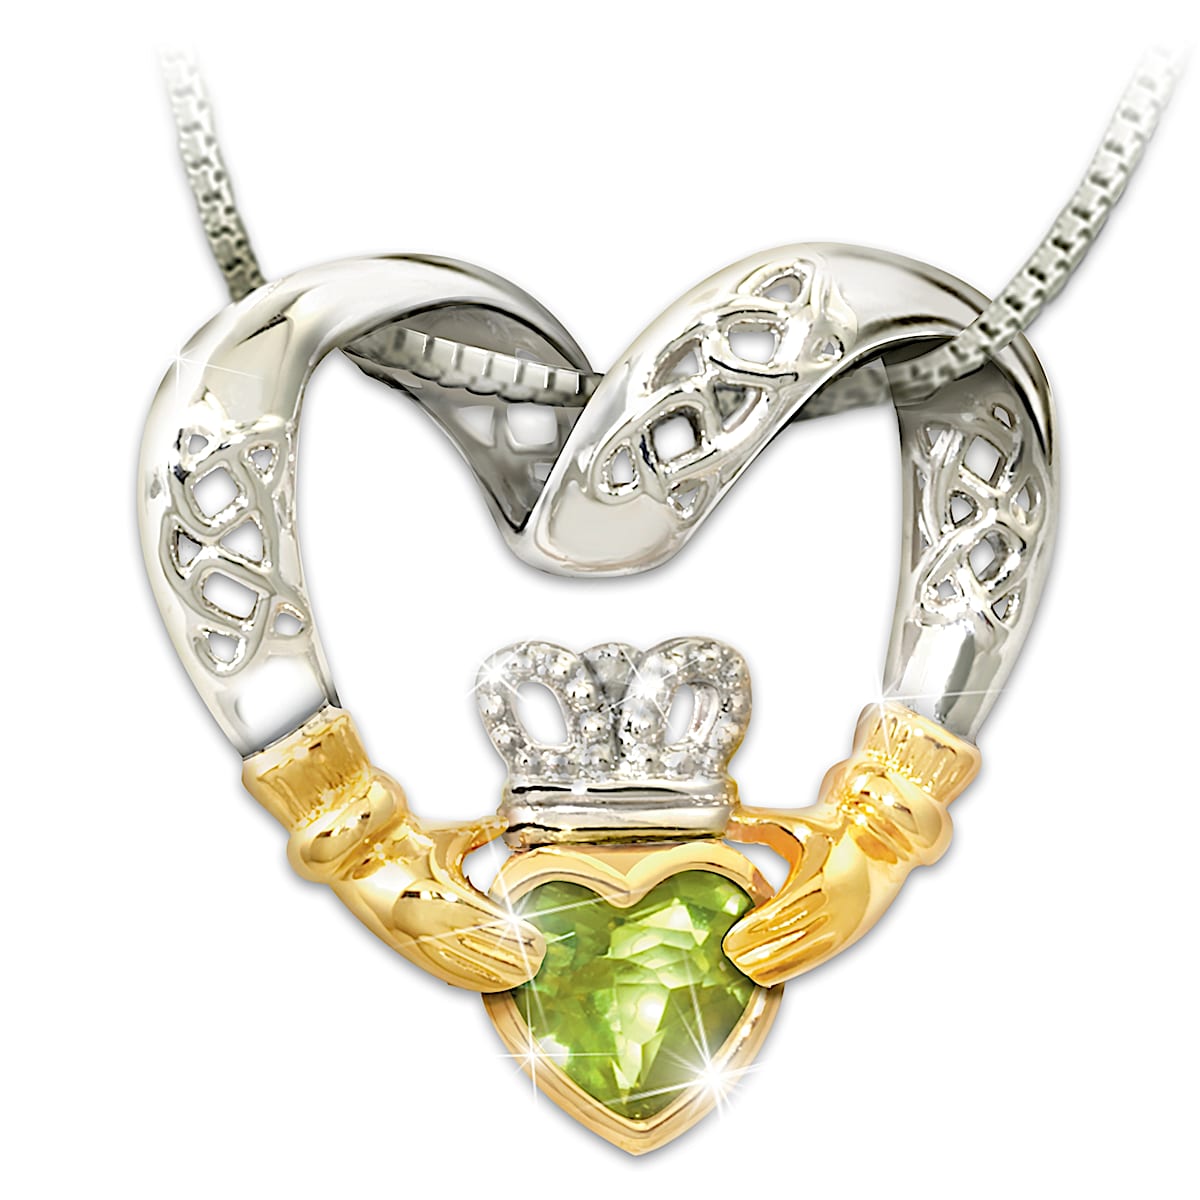 Irish Claddagh Pendant Necklace - 925 Sterling Silver Green Glass Love Gift  NEW | eBay